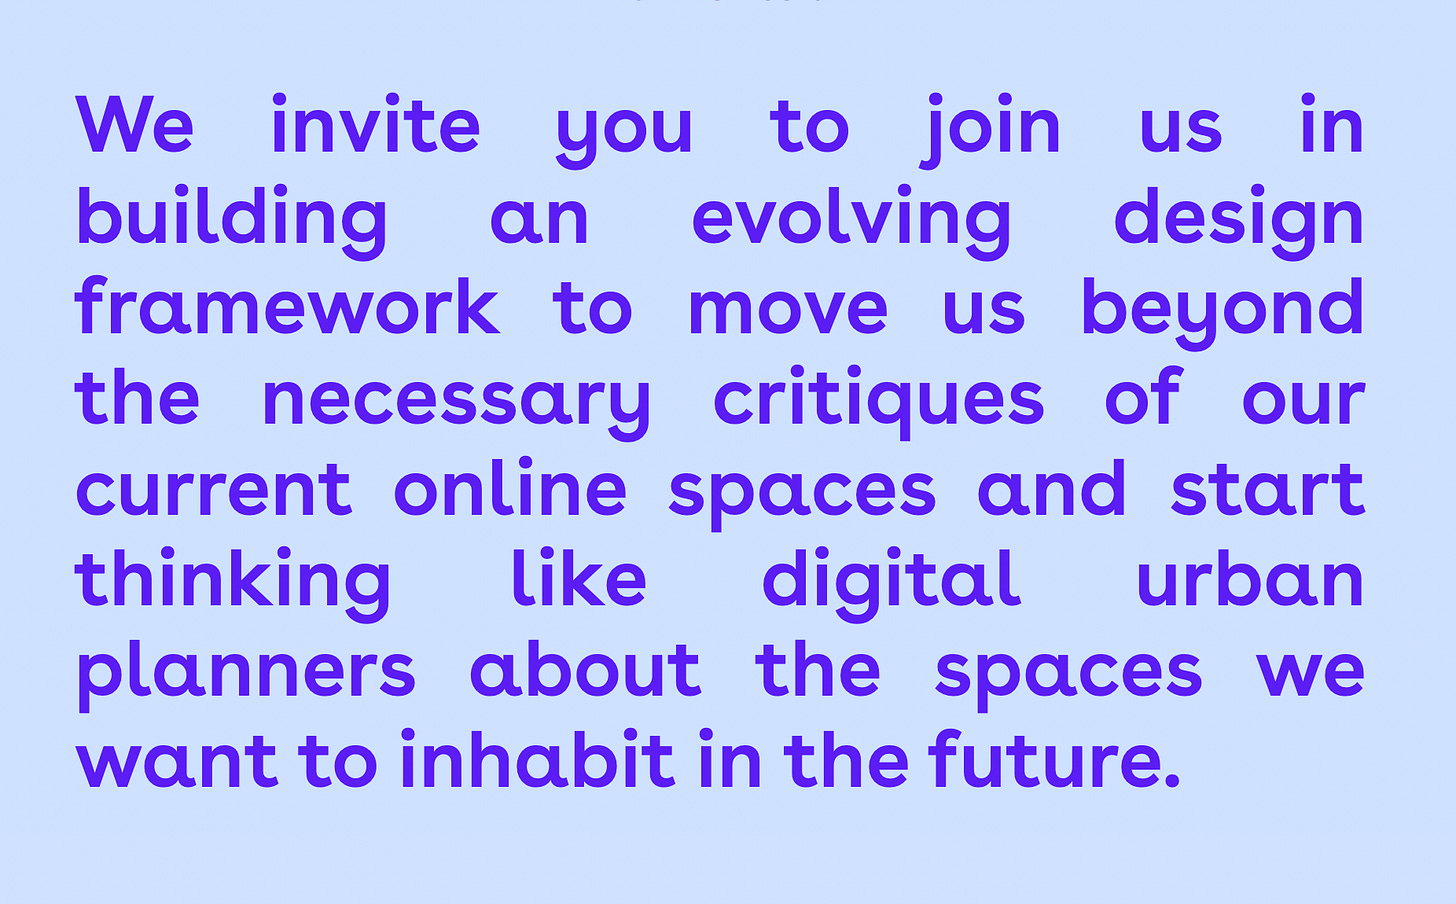 A screenshot from our website. Text: “We invite you to join us in building an evolving design framework to move us beyond the necessary critiques of our current online spaces and start thinking like digital urban planners about the spaces we want to inhabit in the future.”